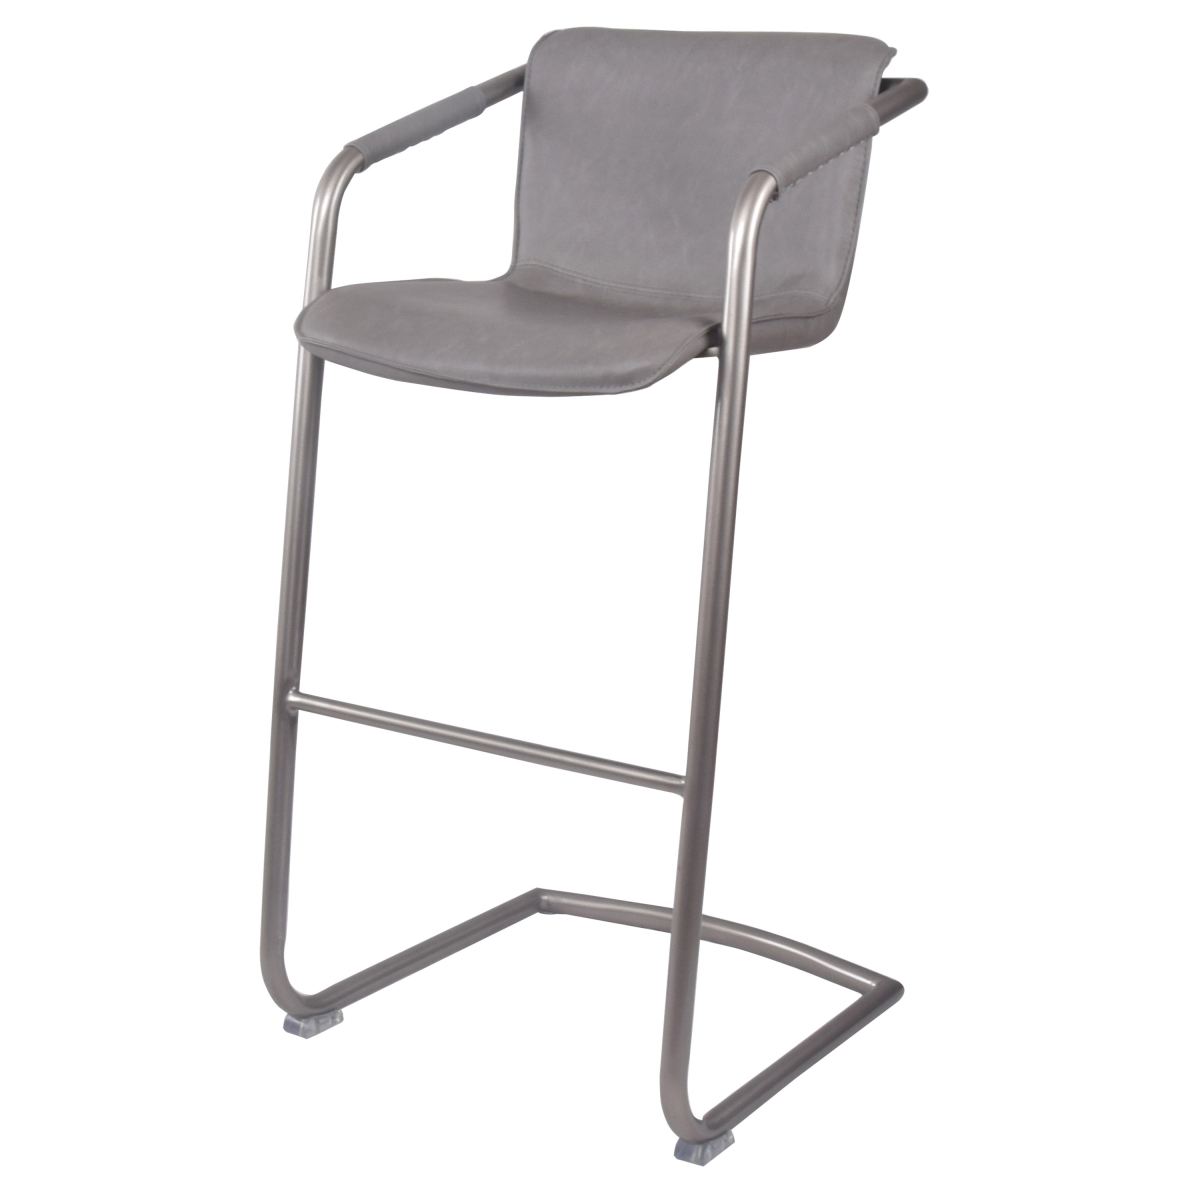 1060003-216 Indy Pu Leather Bar Stool, Antique Graphite Gray - Set Of 2